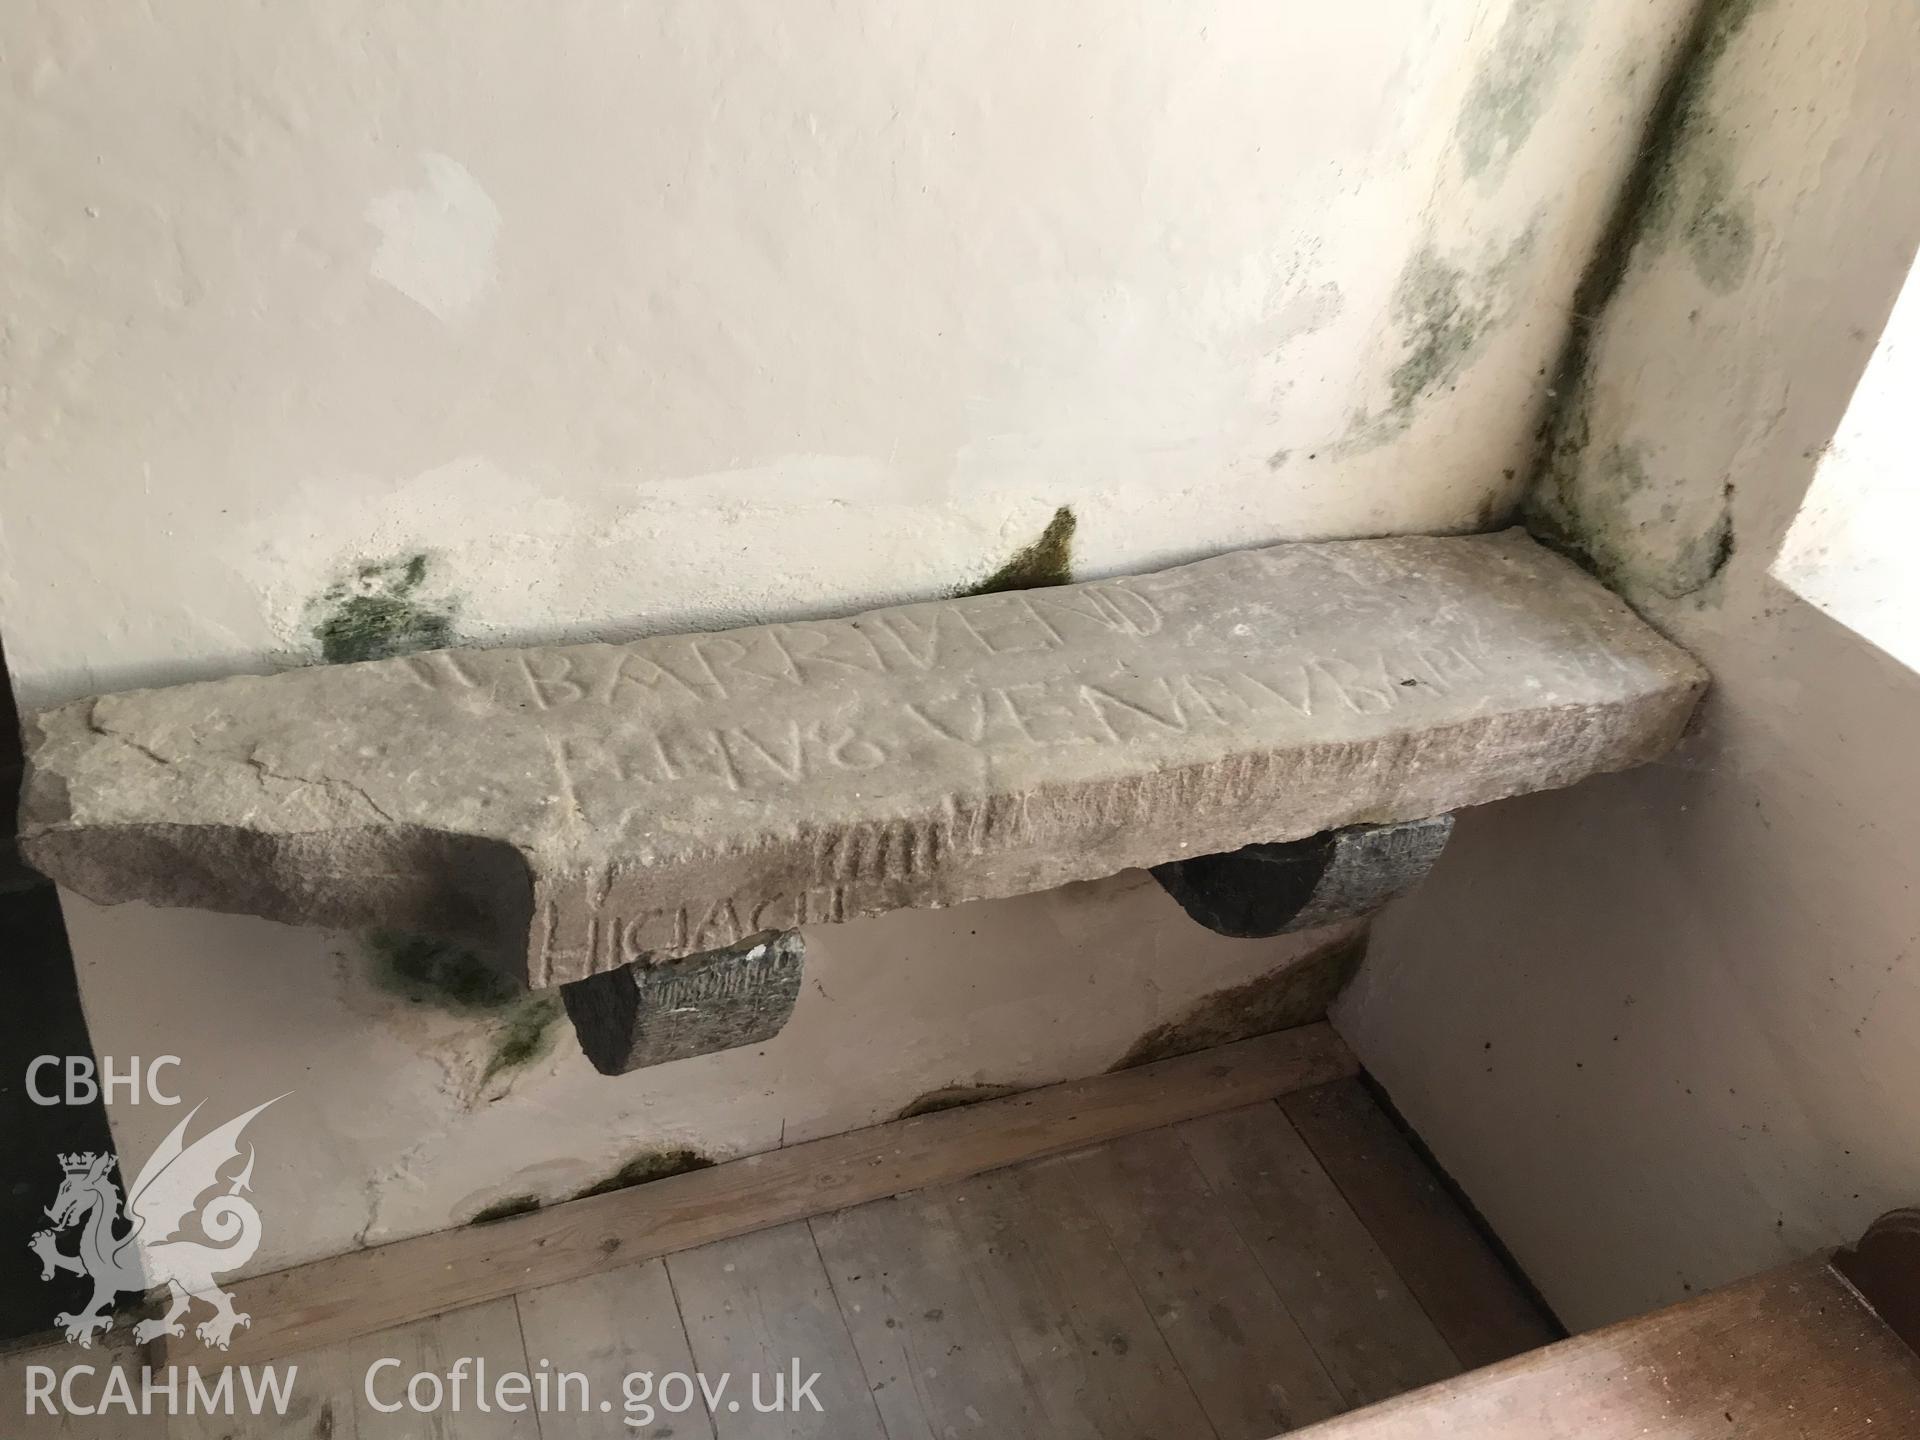 Colour photo showing inscribed bench inside the church of St. Odoceus and St. Margaret Marlos, Llandawke, taken by Paul R. Davis, 6th May 2018.